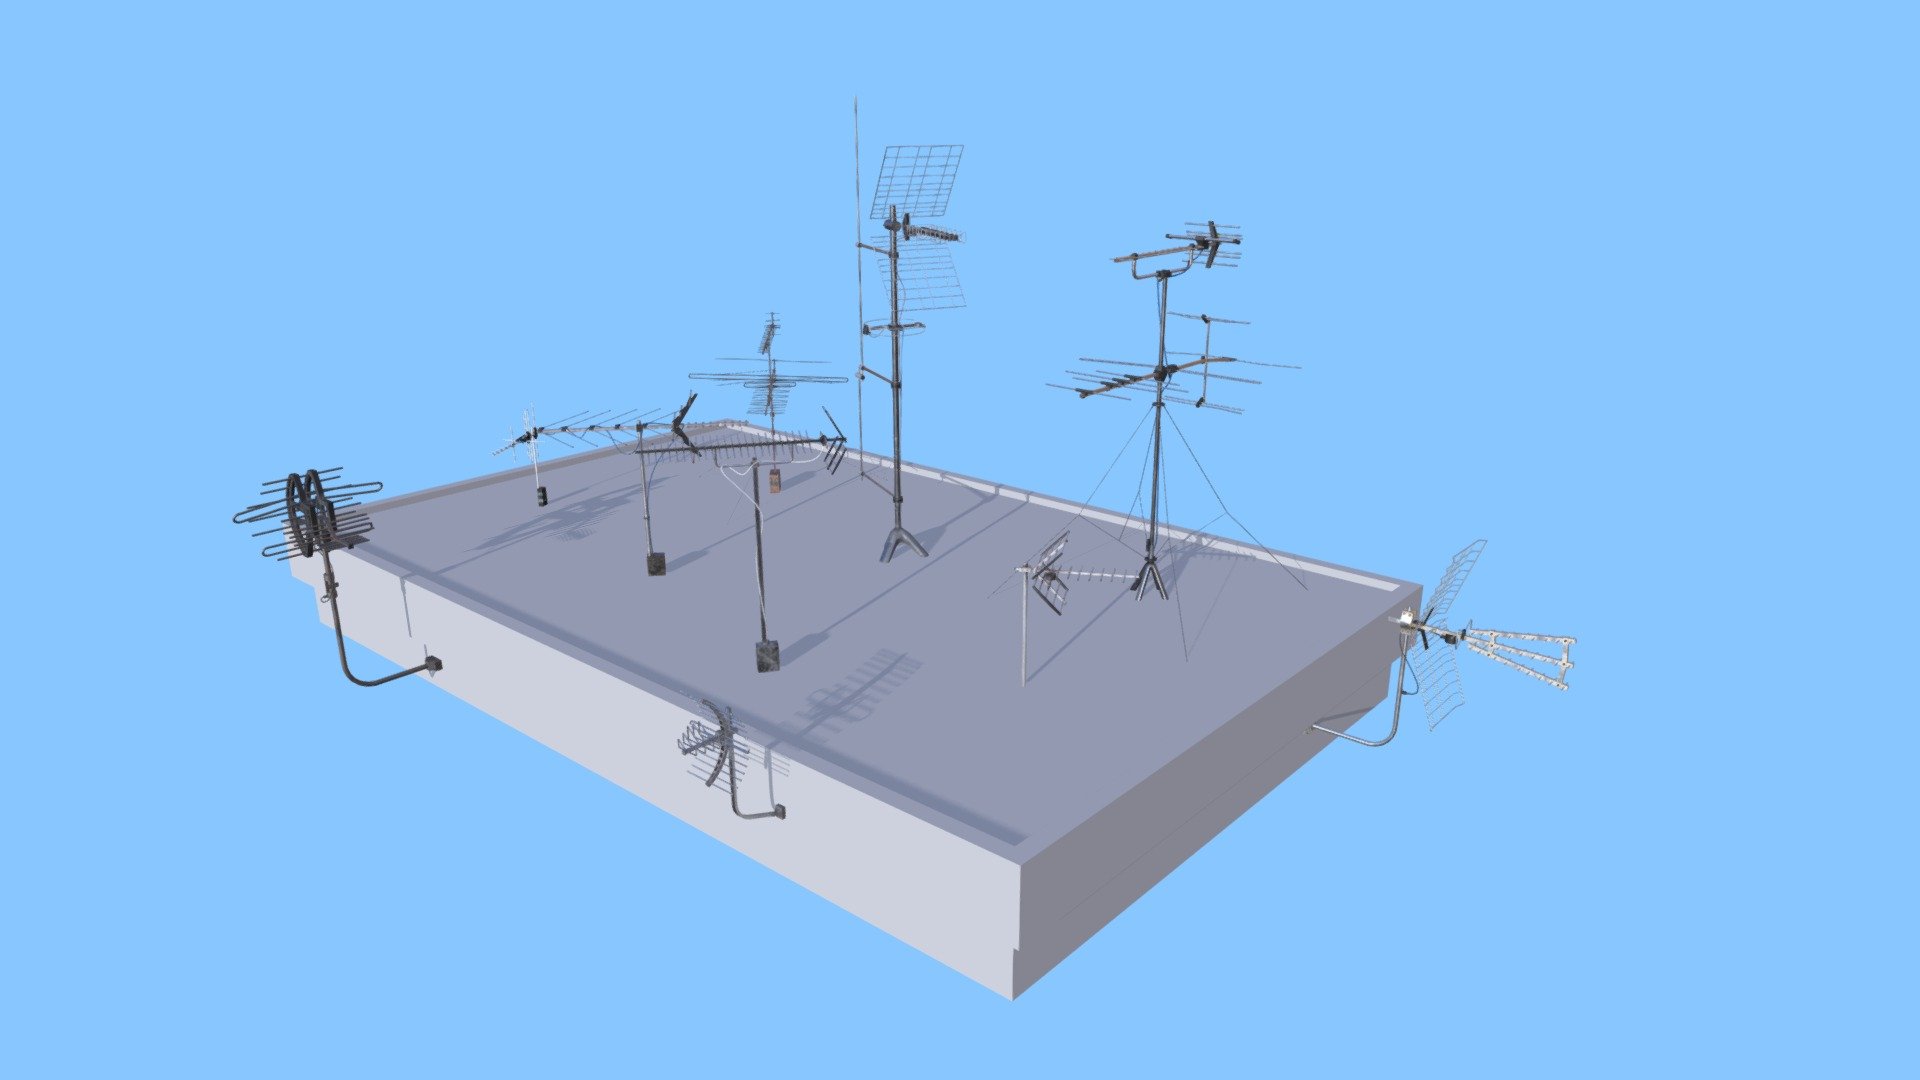 Antennas Pack - a low poly game asset pack of various TV Antenna models. From small to big, great for any roof decoration.

Ready for Unity and Unreal engines 3d model